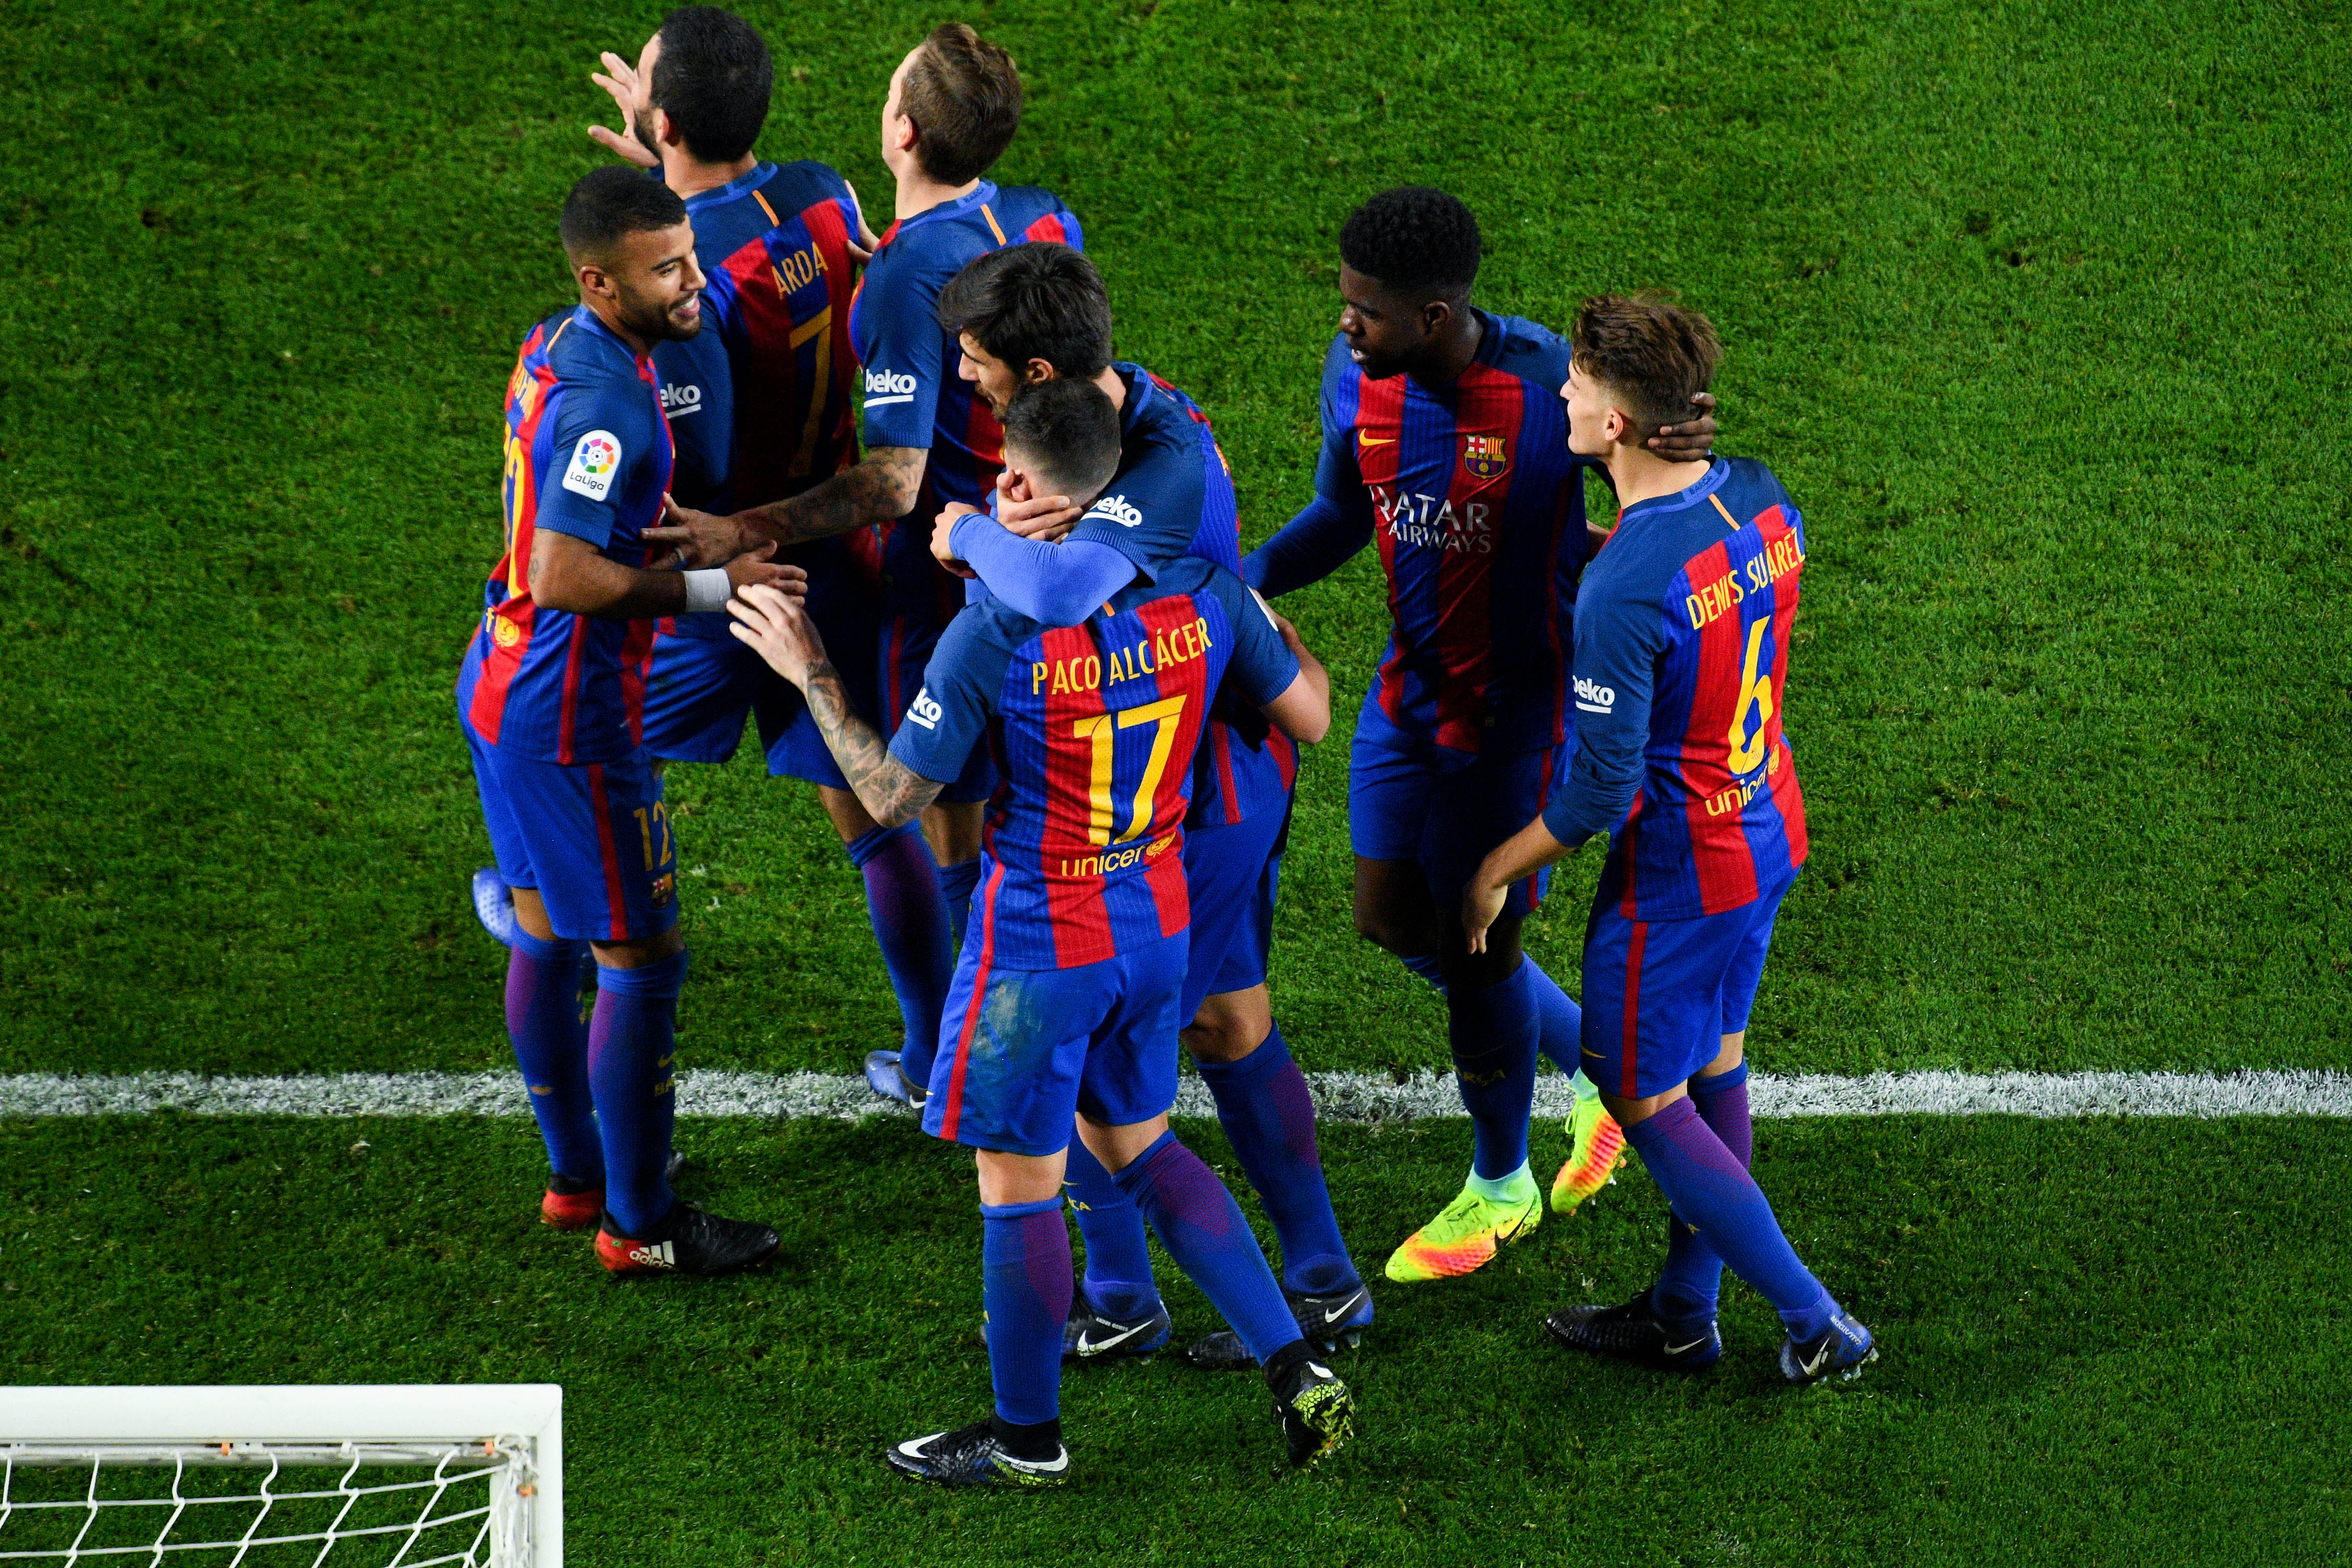 BARCELONA, SPAIN - DECEMBER 21:  Paco Alcacer of FC Barcelona celebrates with his team mates after scoring his team's fifth goal during the Copa del Rey round of 32 second leg match between FC Barcelona and Hercules at Camp Nou on December 21, 2016 in Barcelona, Spain.  (Photo by David Ramos/Getty Images)